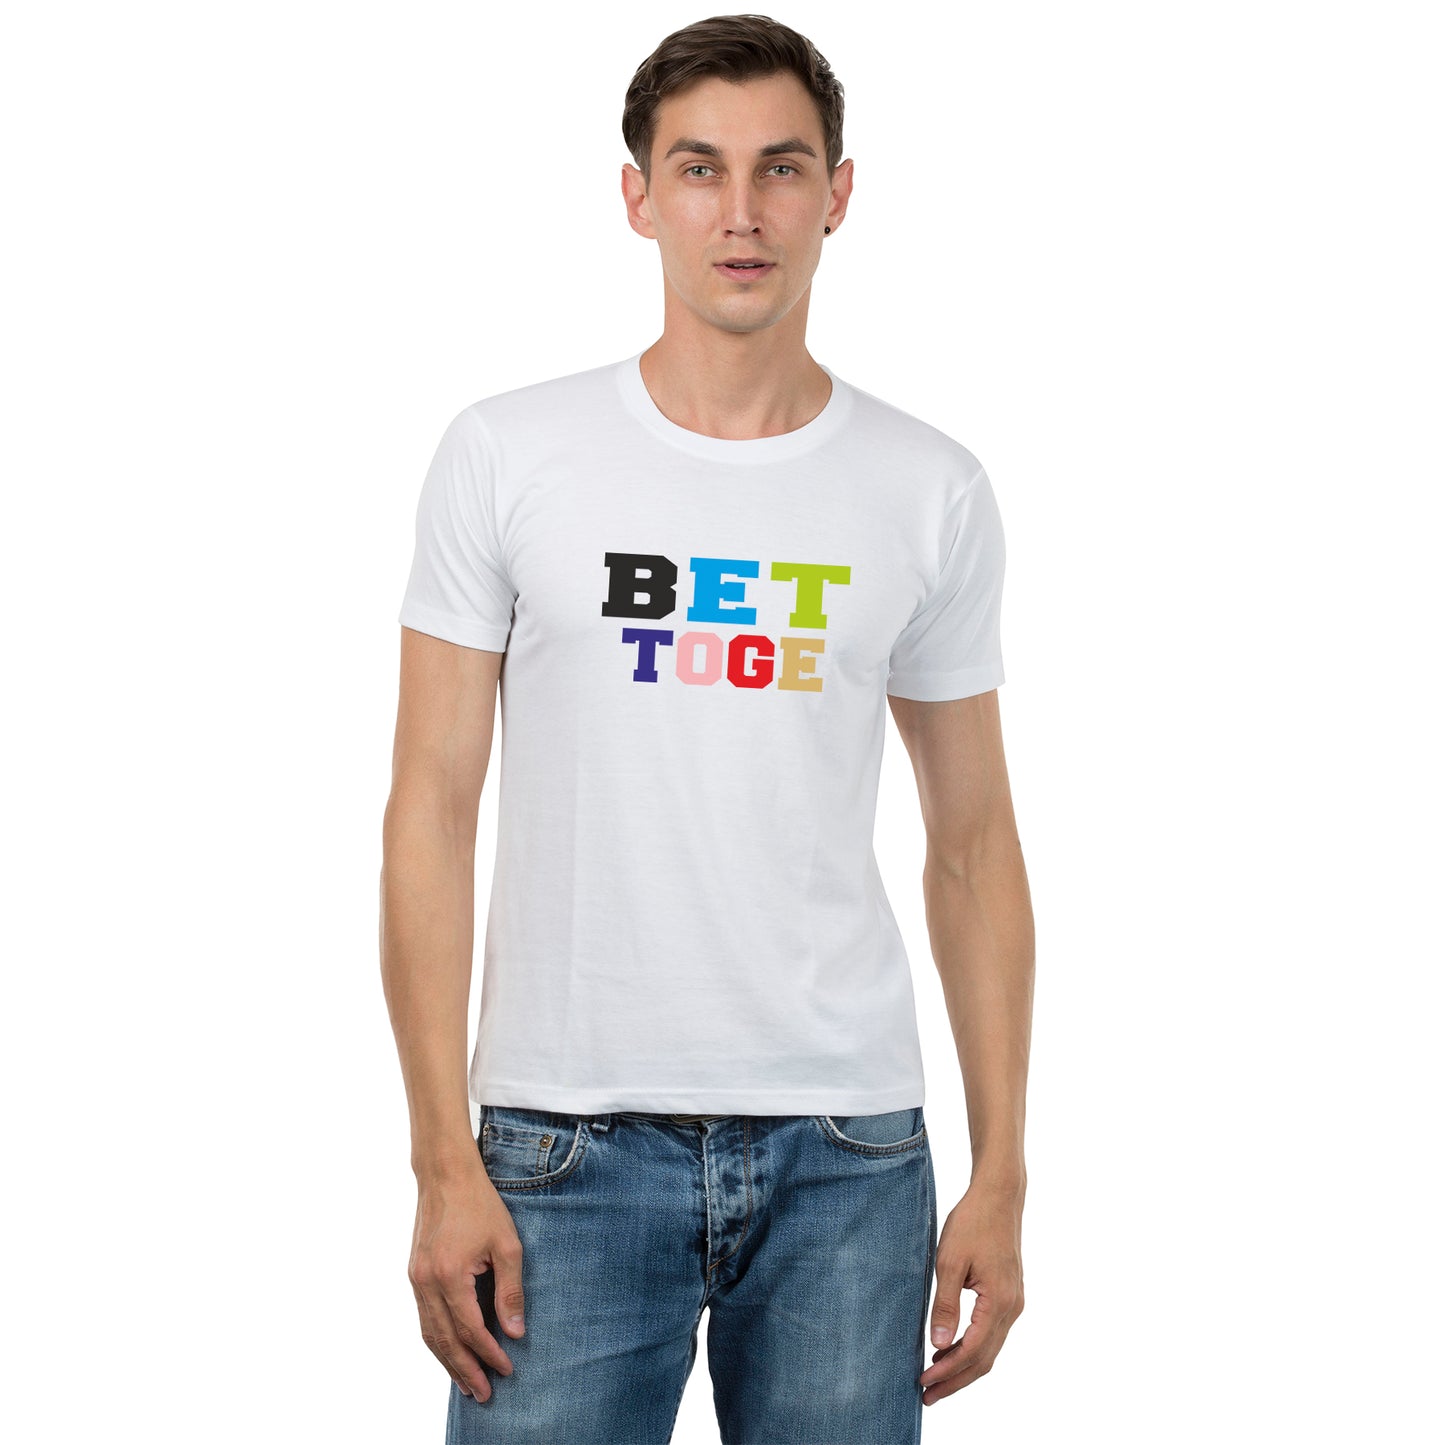 Better Together matching Couple T shirts- White